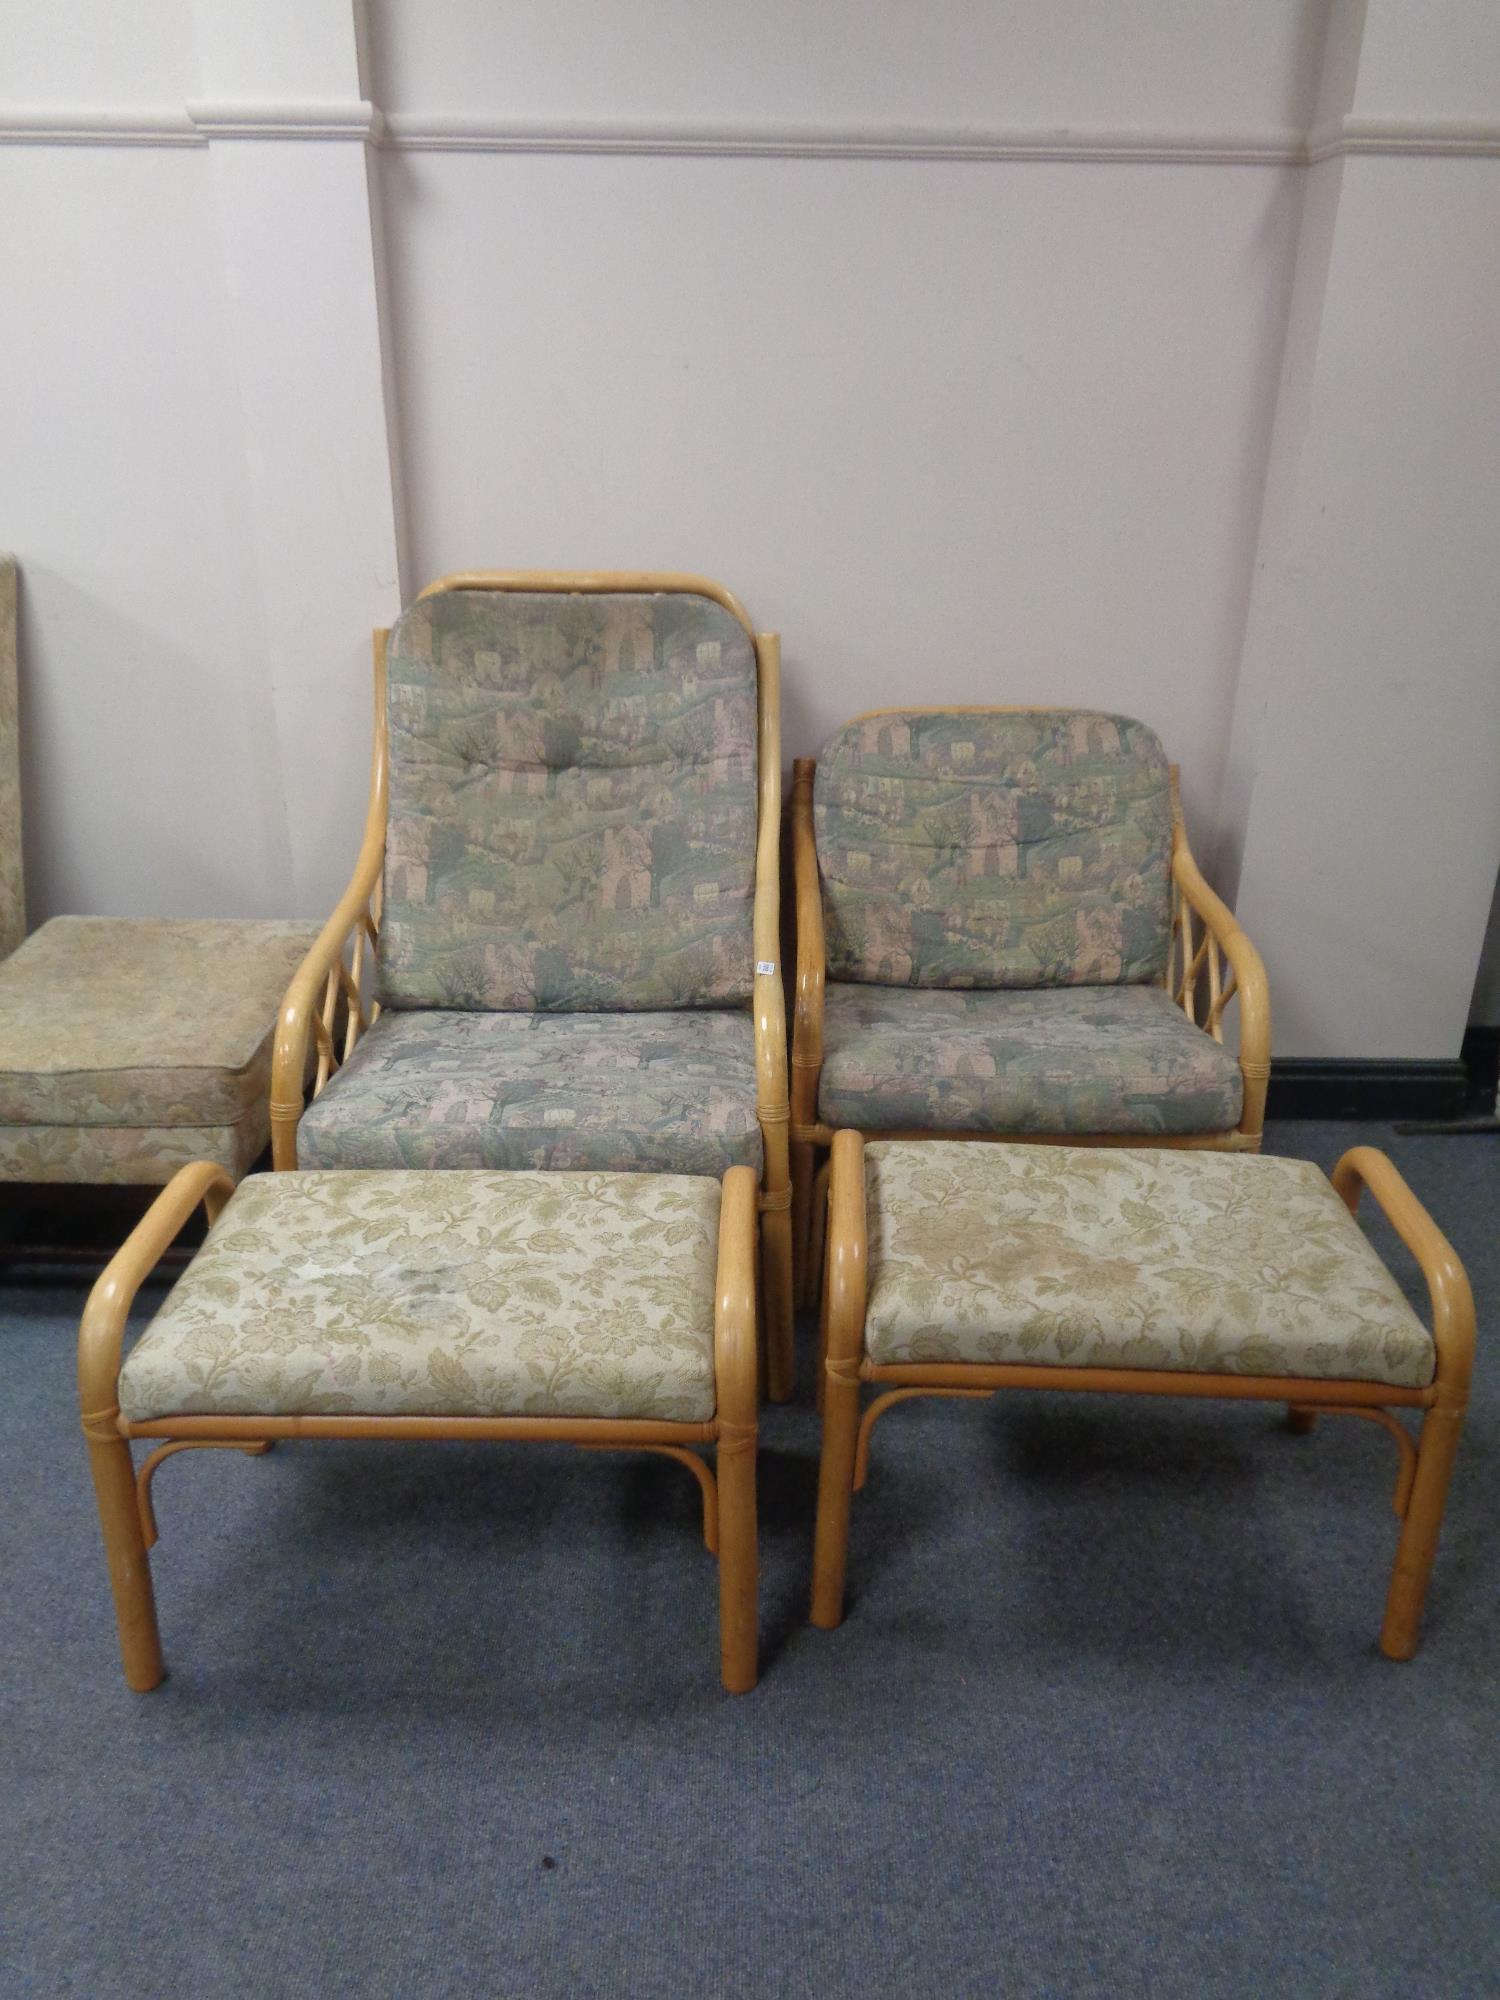 Two bamboo armchairs together with two similar footstools